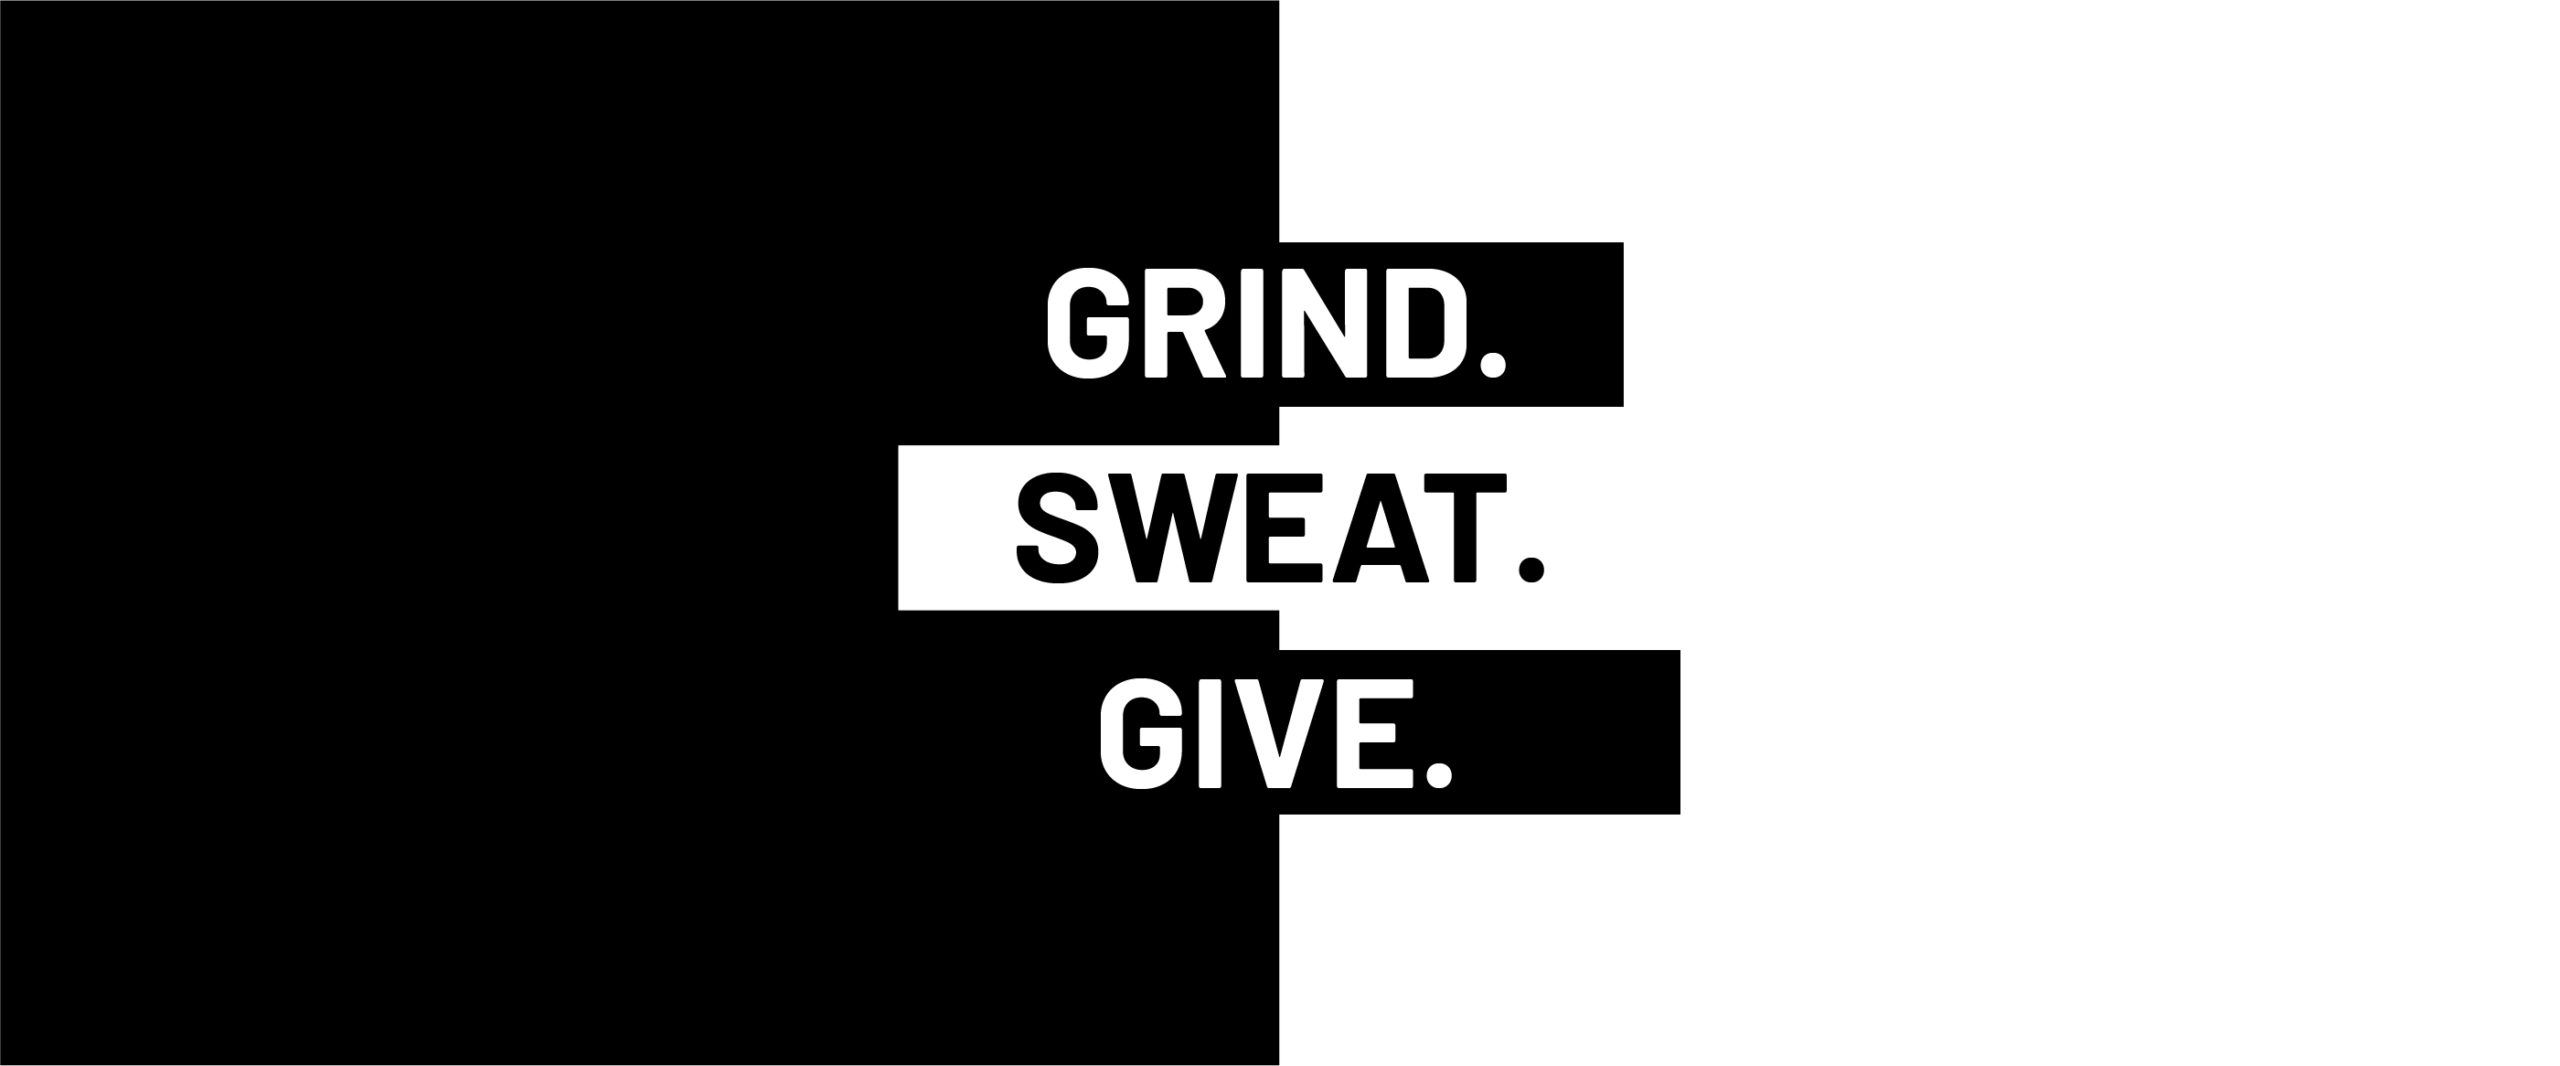 Grind Sweat Give Remedy copywriting slogan for saving lives fitness